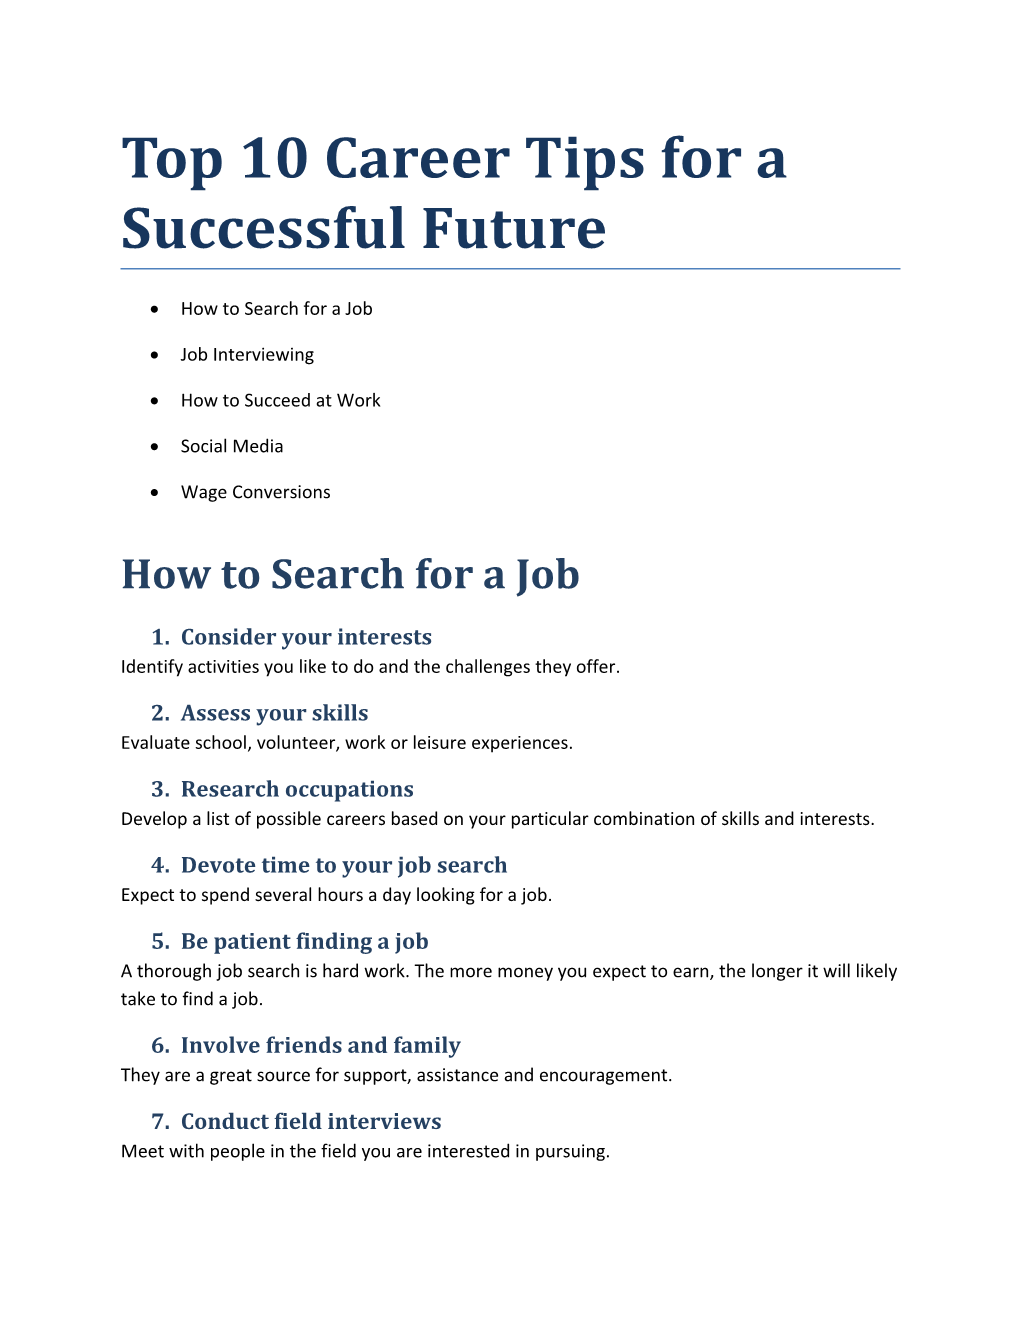 Top 10 Career Tips for a Successful Future